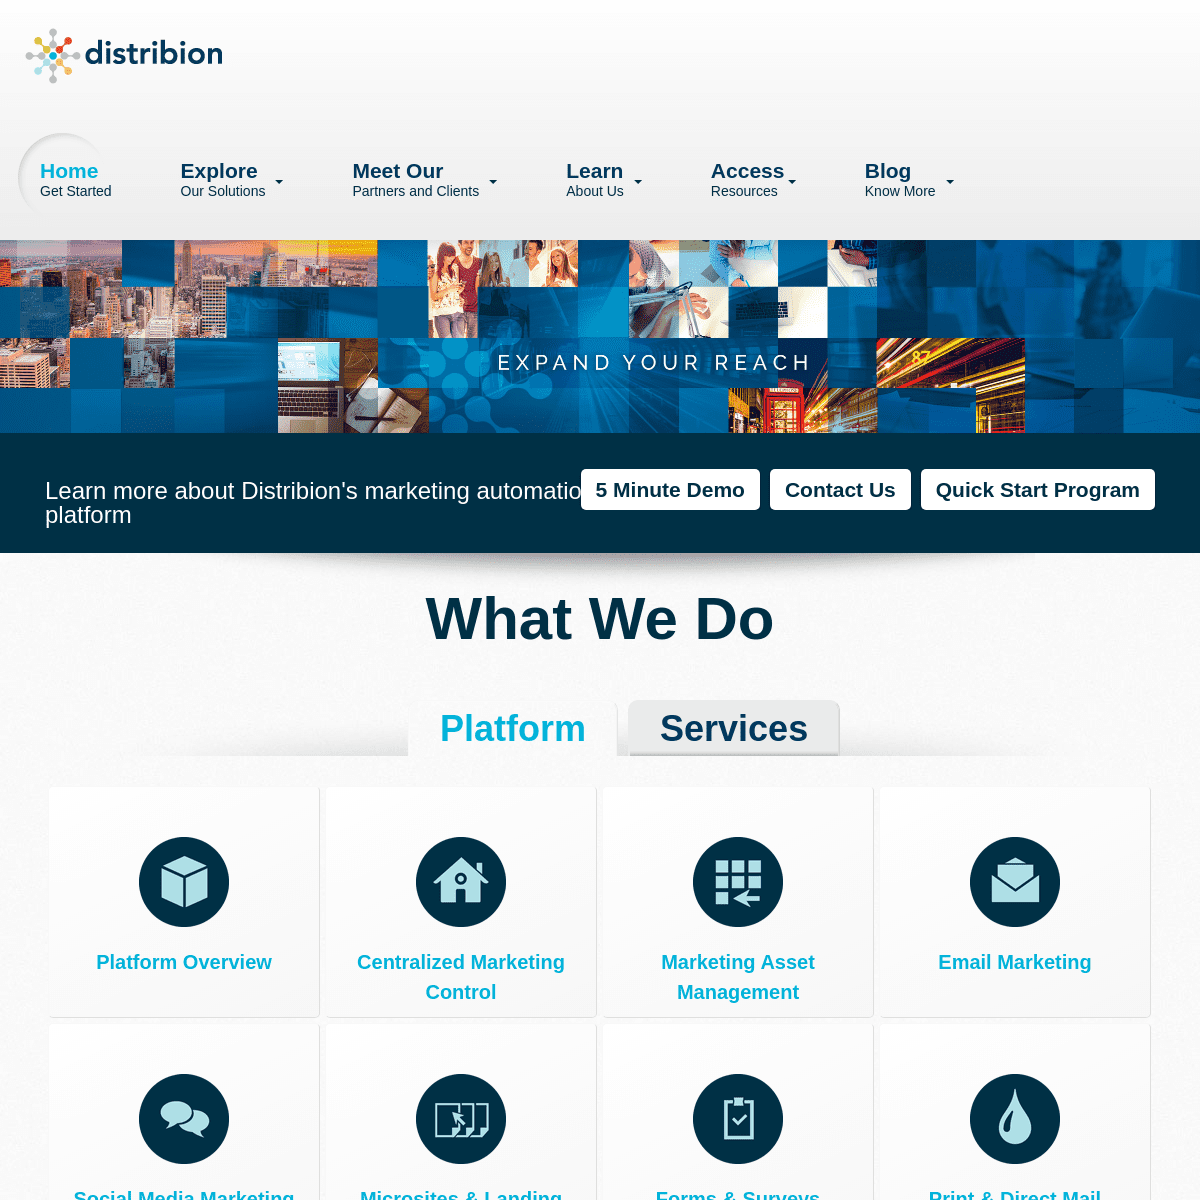 A complete backup of distribion.com